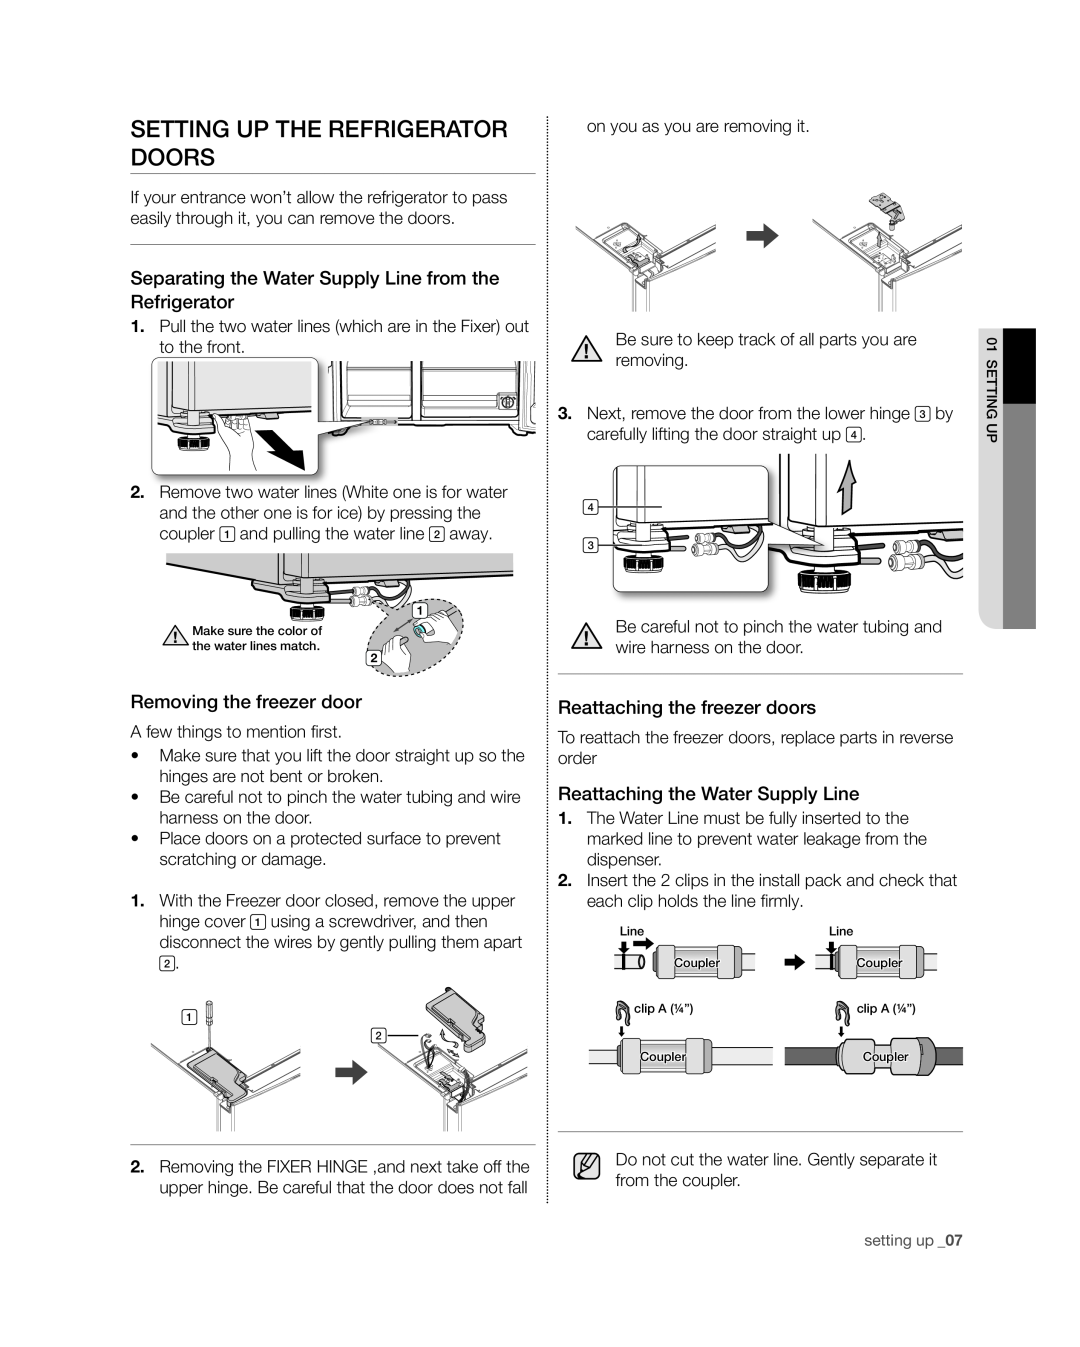 Samsung RSG309** user manual SETTING UP the refrigerator doors, Separating the Water Supply Line from the Refrigerator 